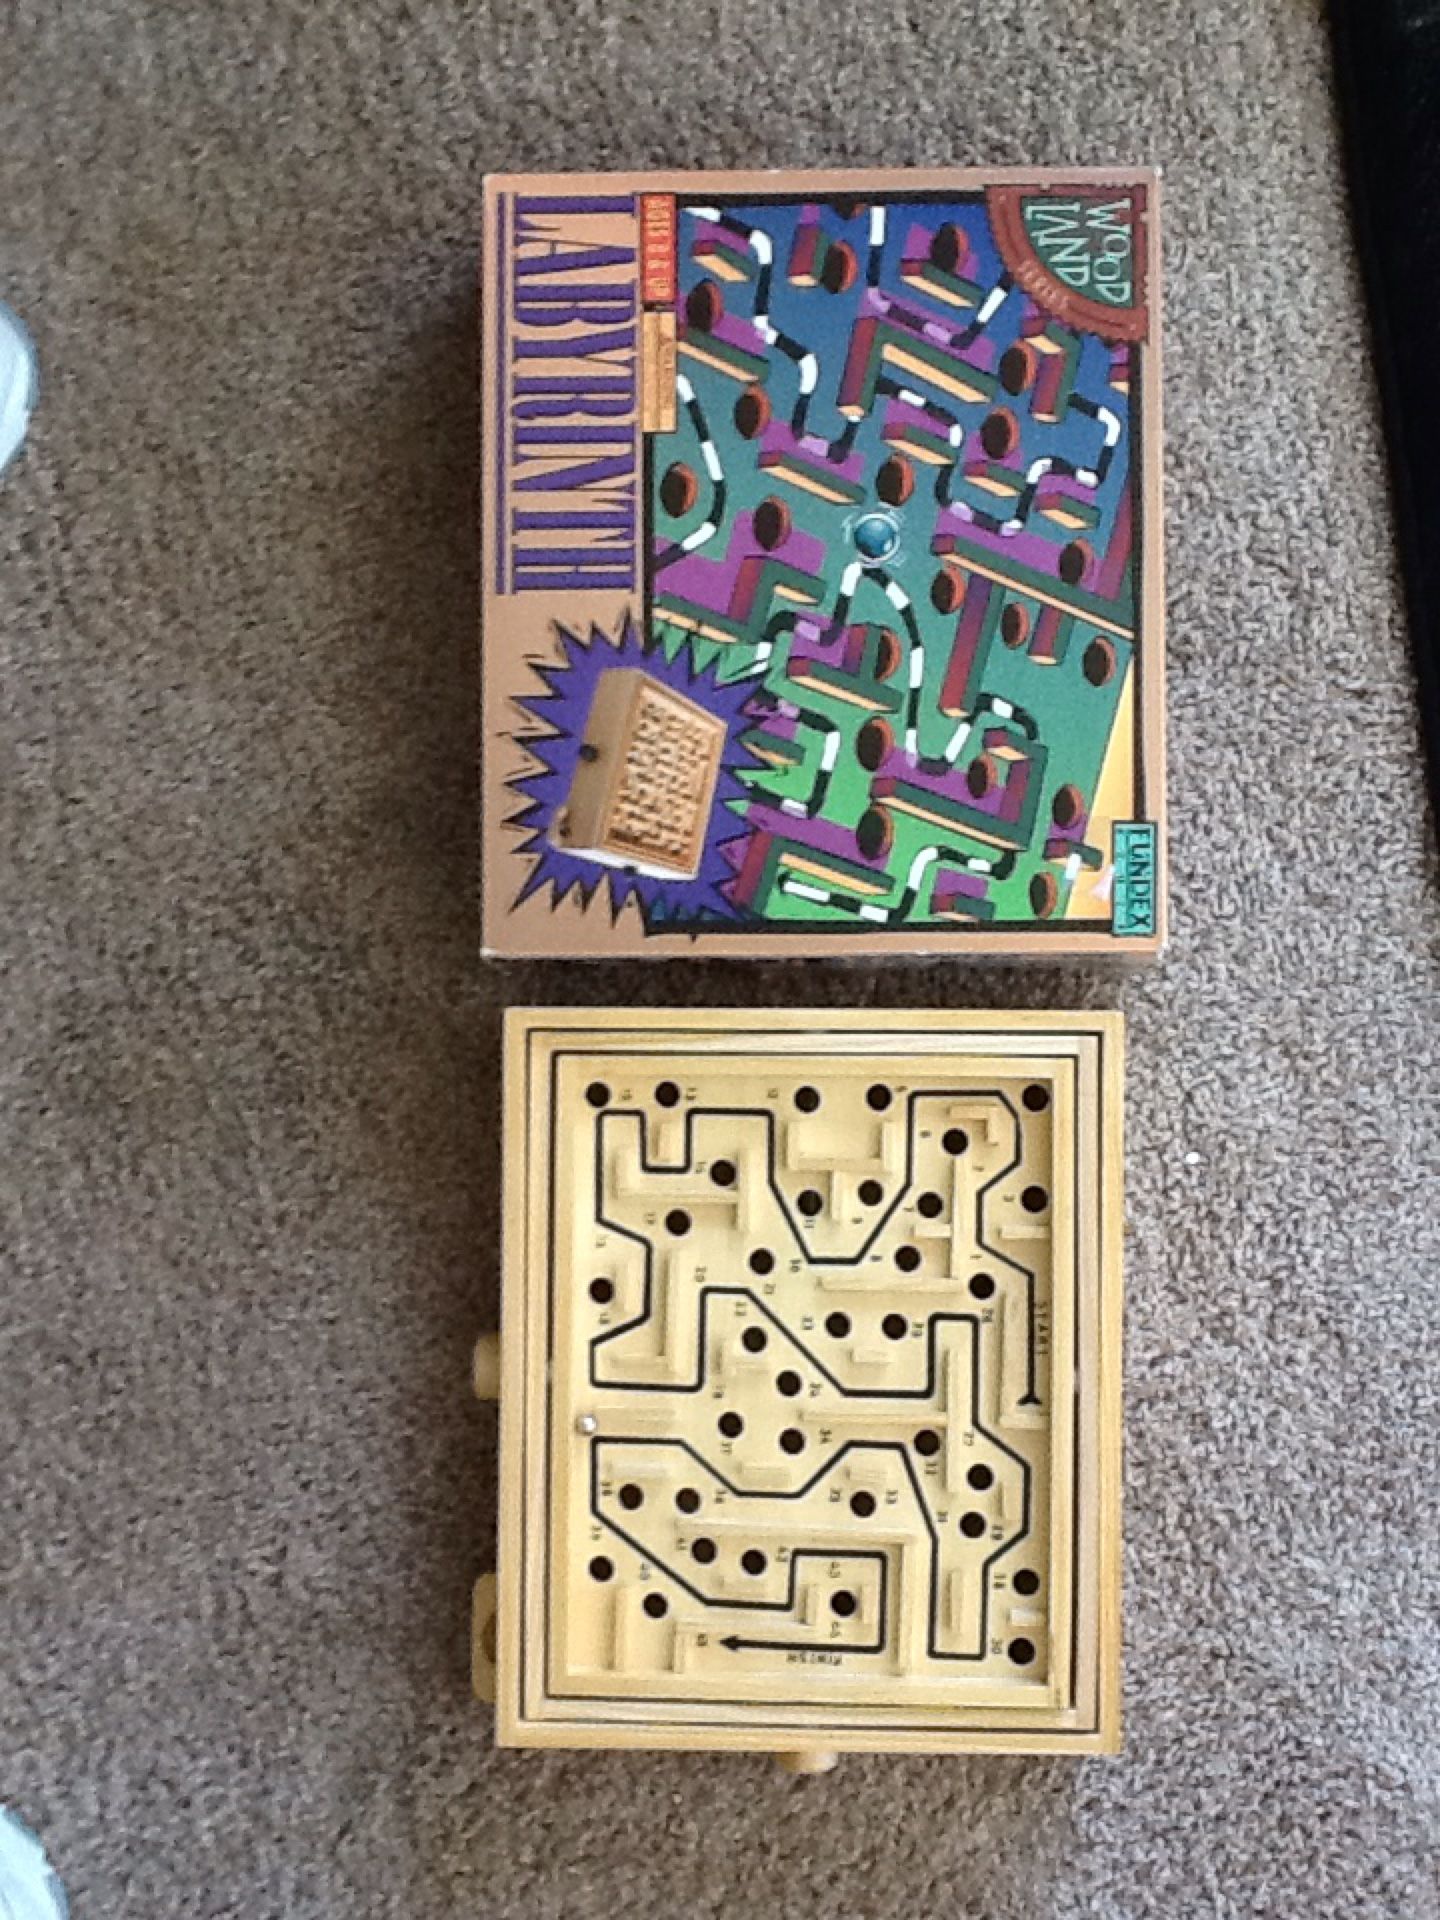 USED: Labyrinth Game